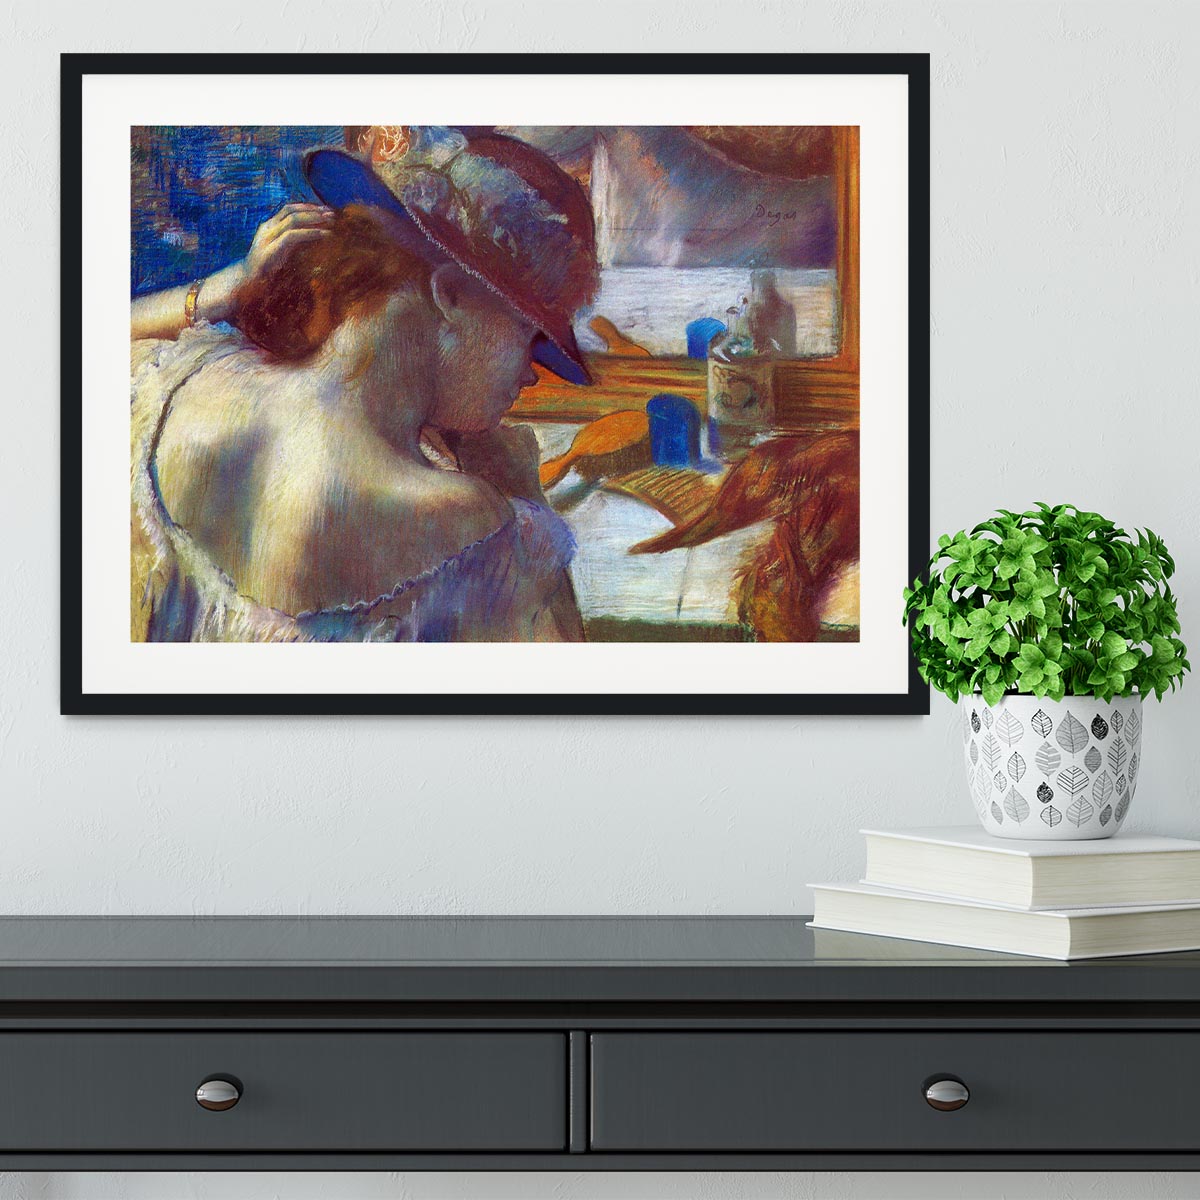 Before the mirror by Degas Framed Print - Canvas Art Rocks - 1